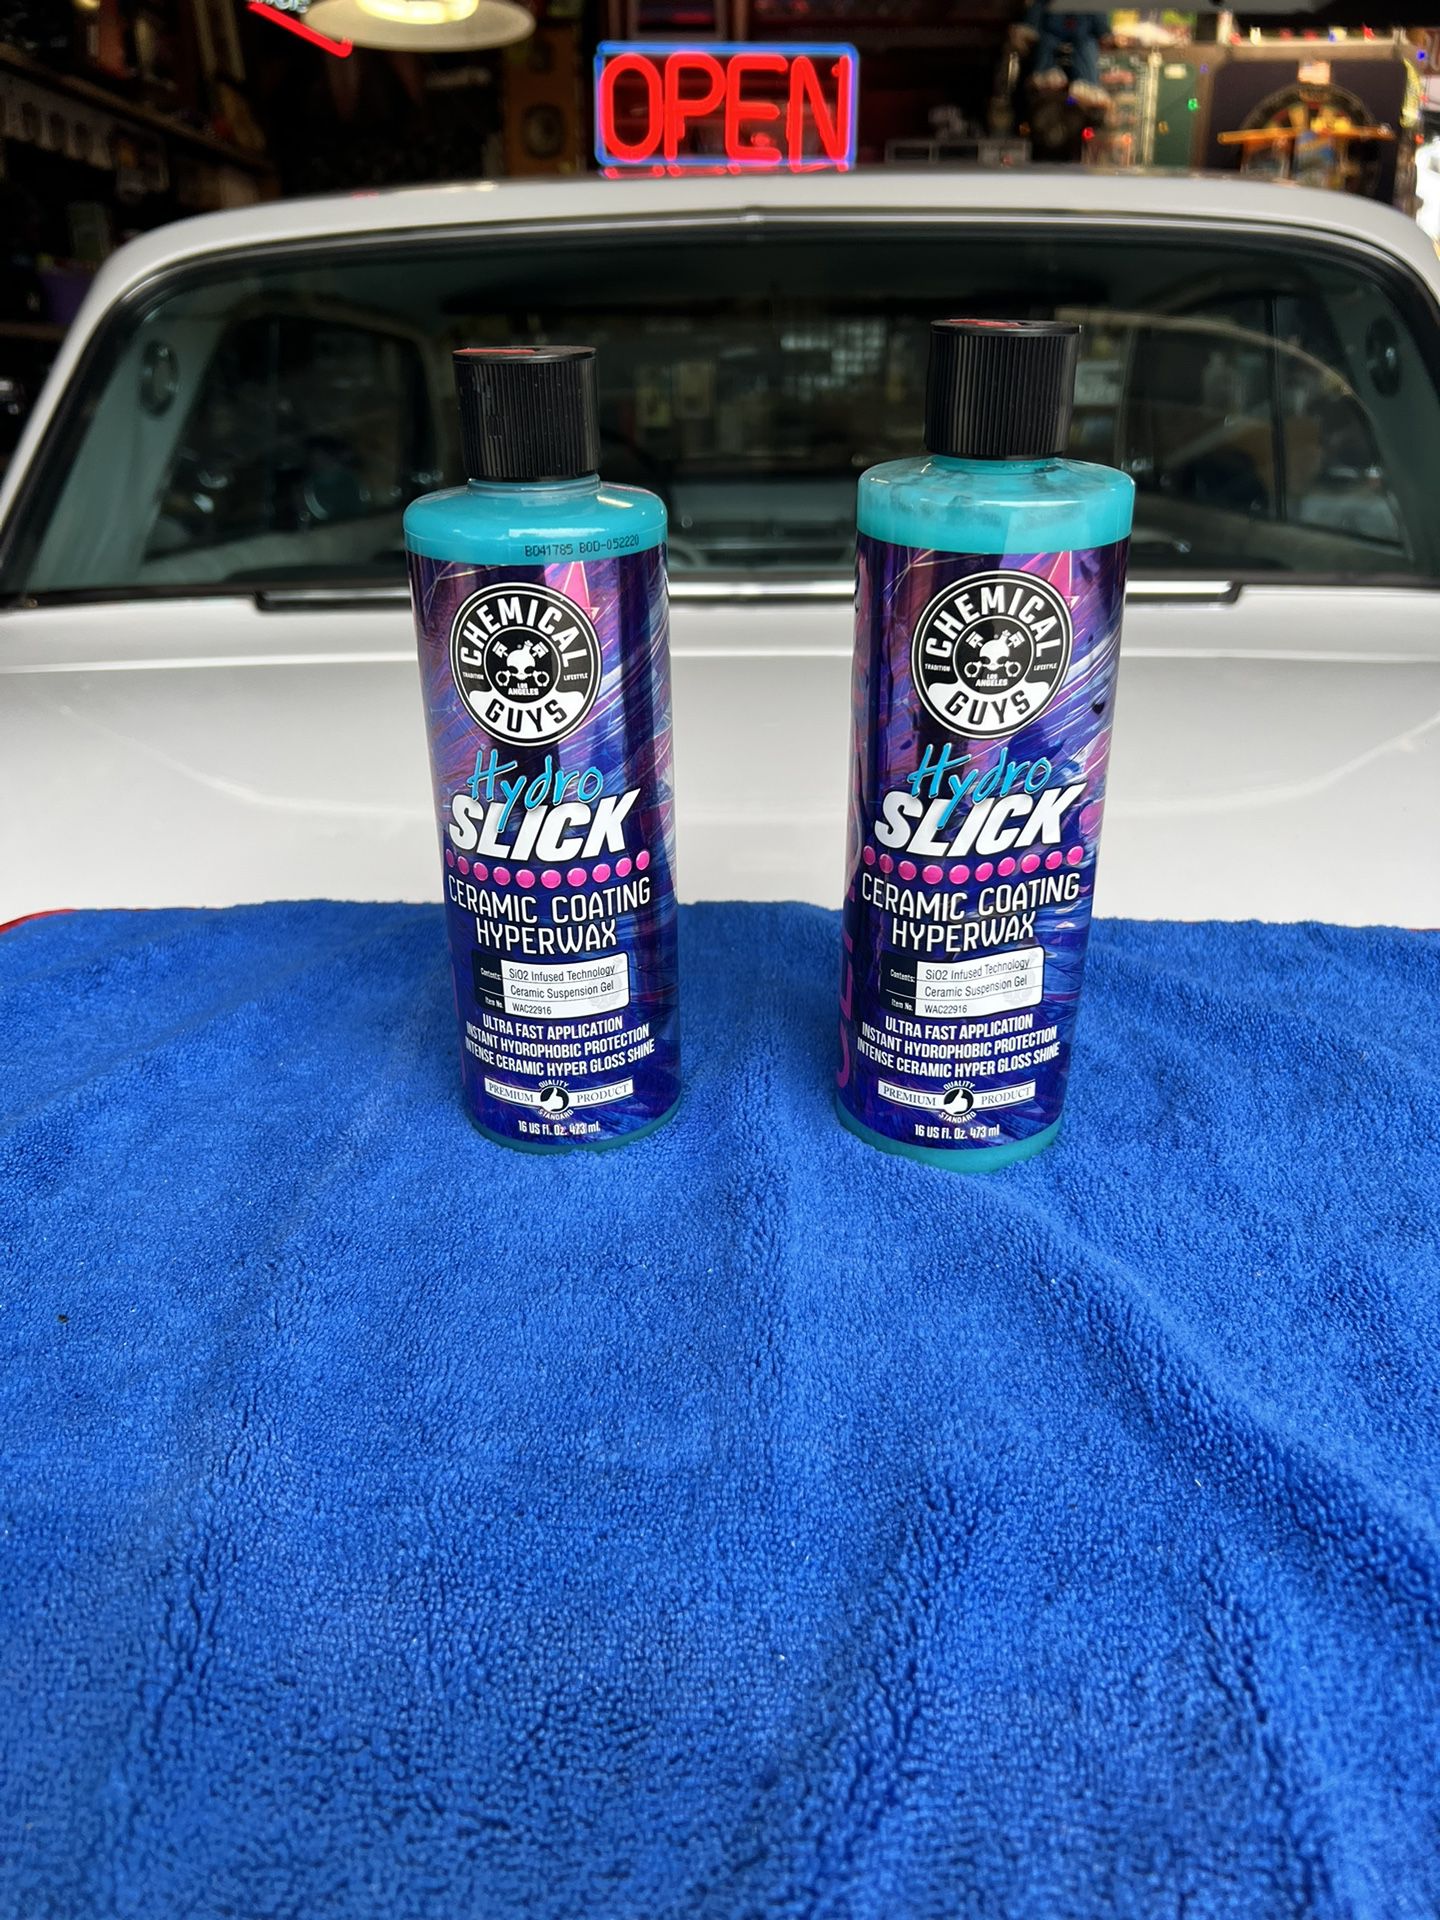 2 Bottle of Chemical Guys HydroSlick Intense Gloss SI02 Ceramic Coating  Hyperwax for Sale in San Jose, CA - OfferUp